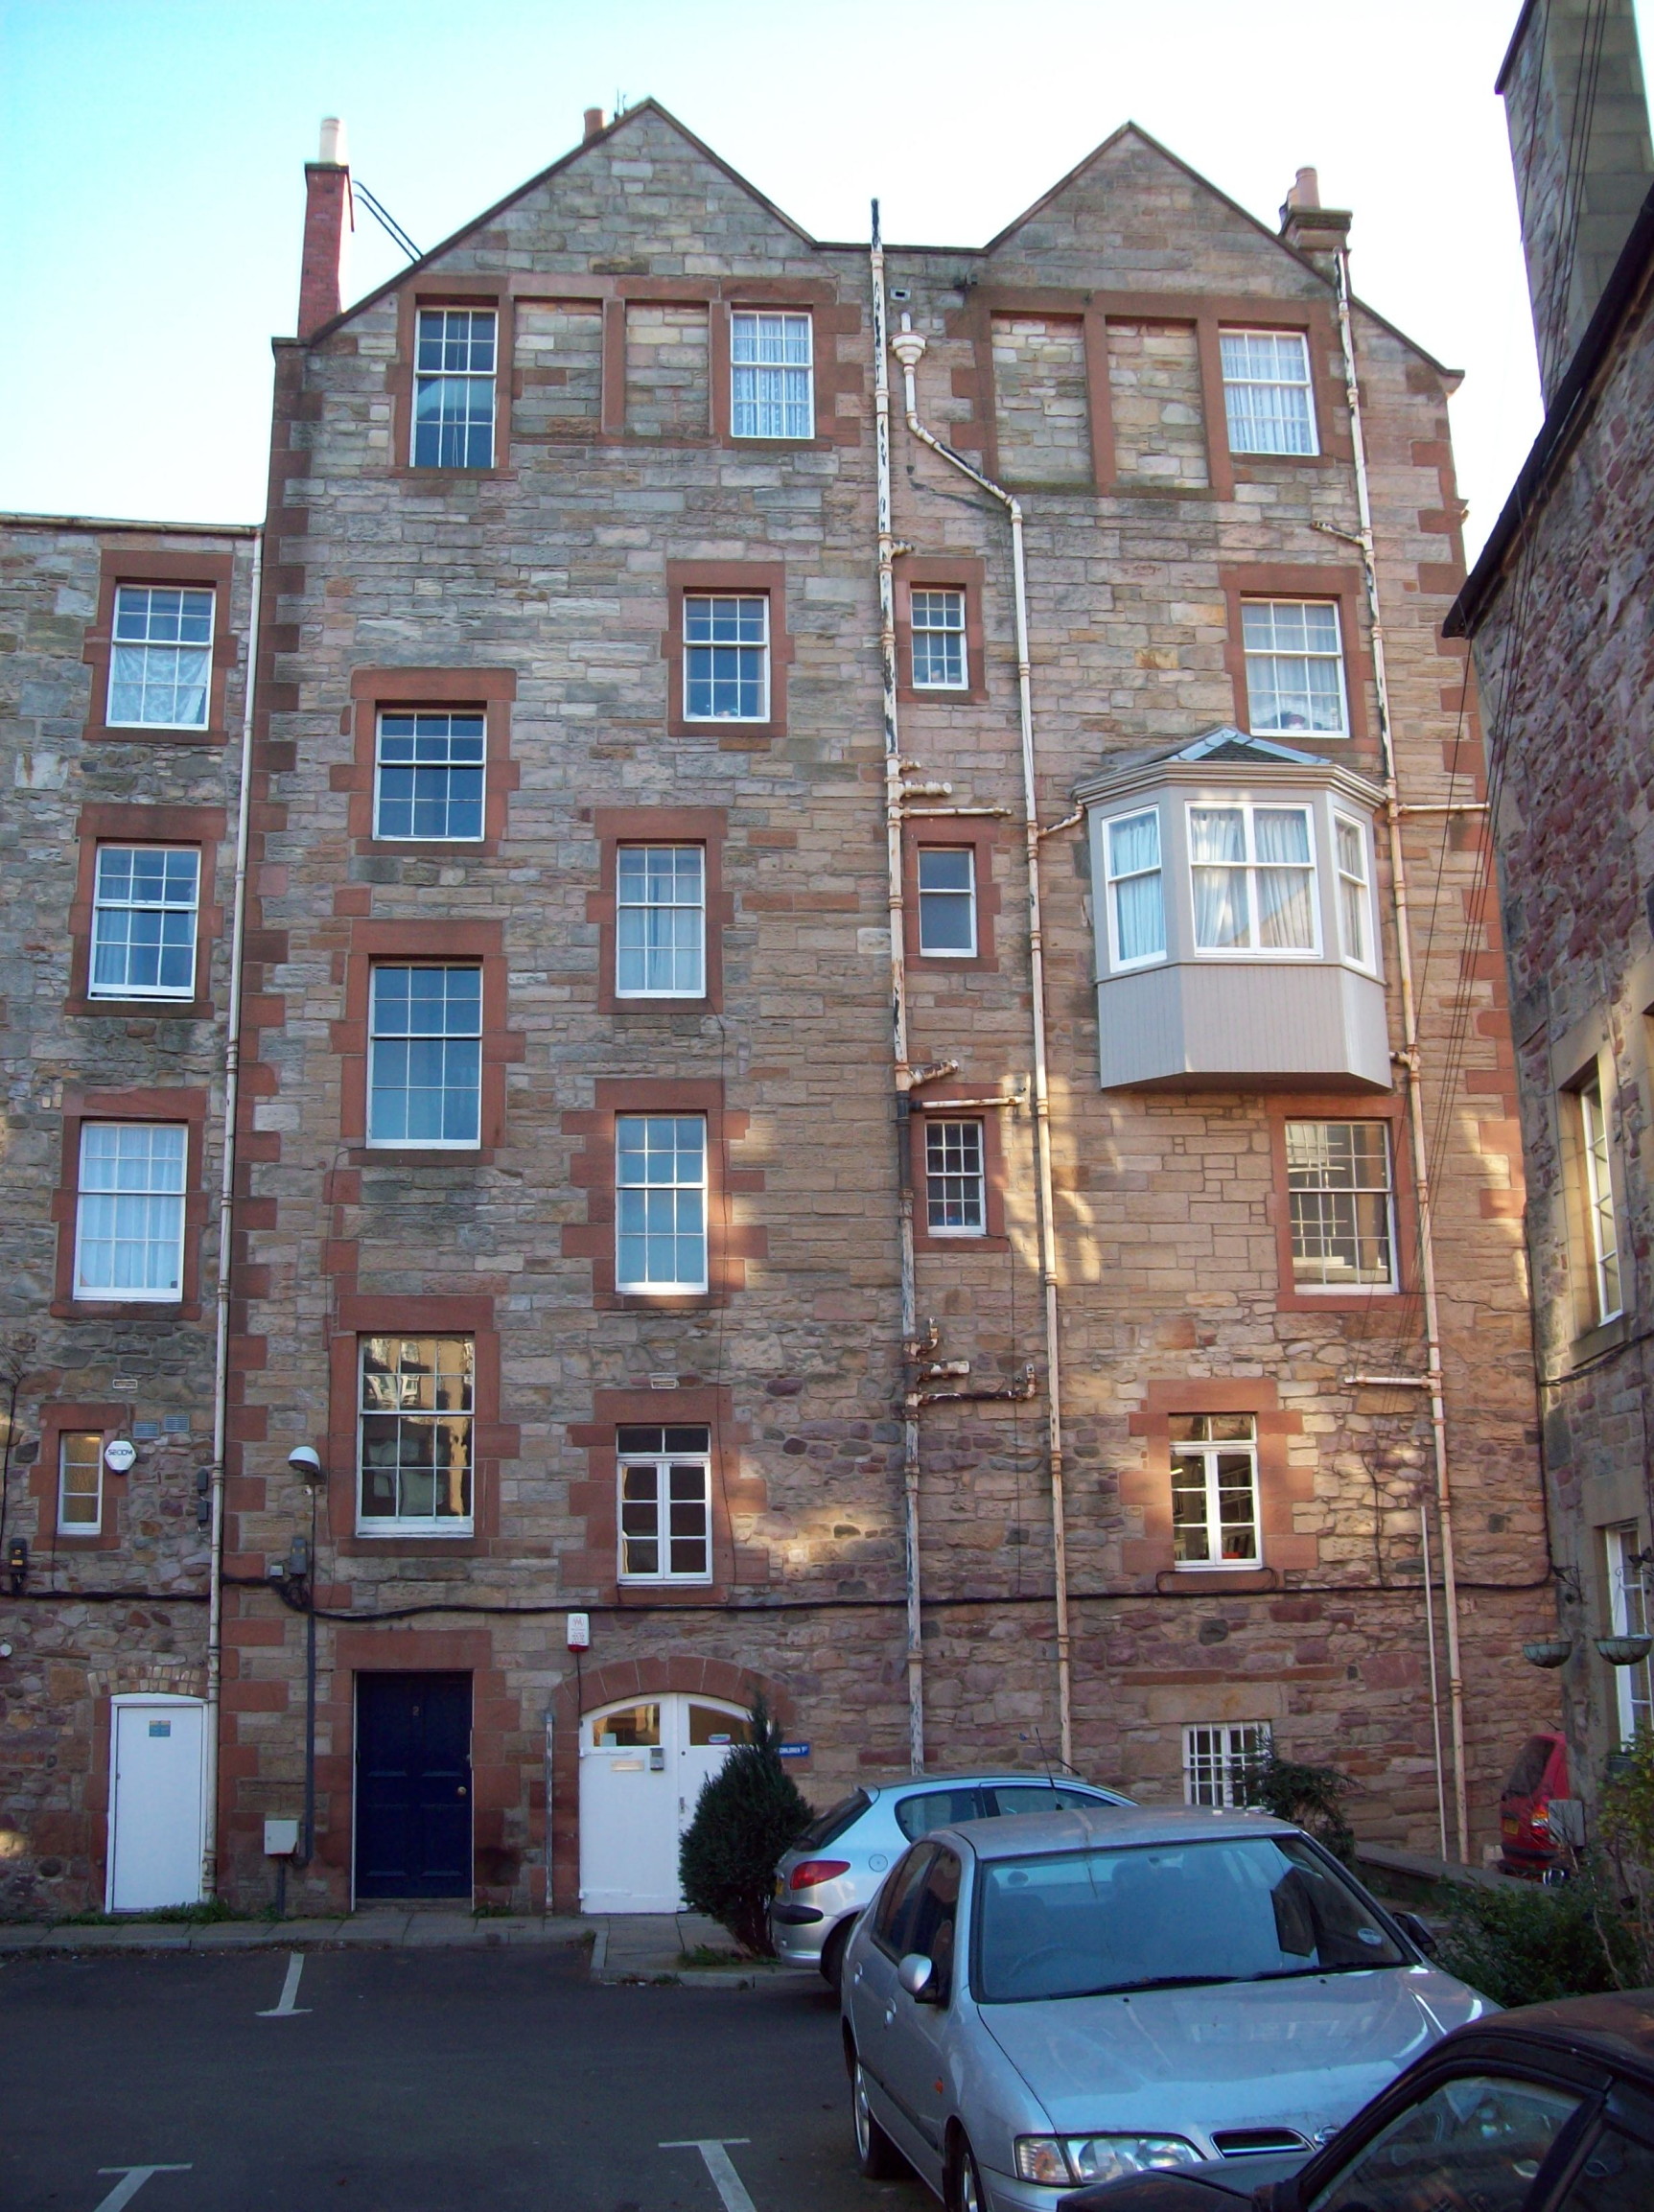 five-storey building in ginger stone with red sandstone trim around the windows and a double triangular roof